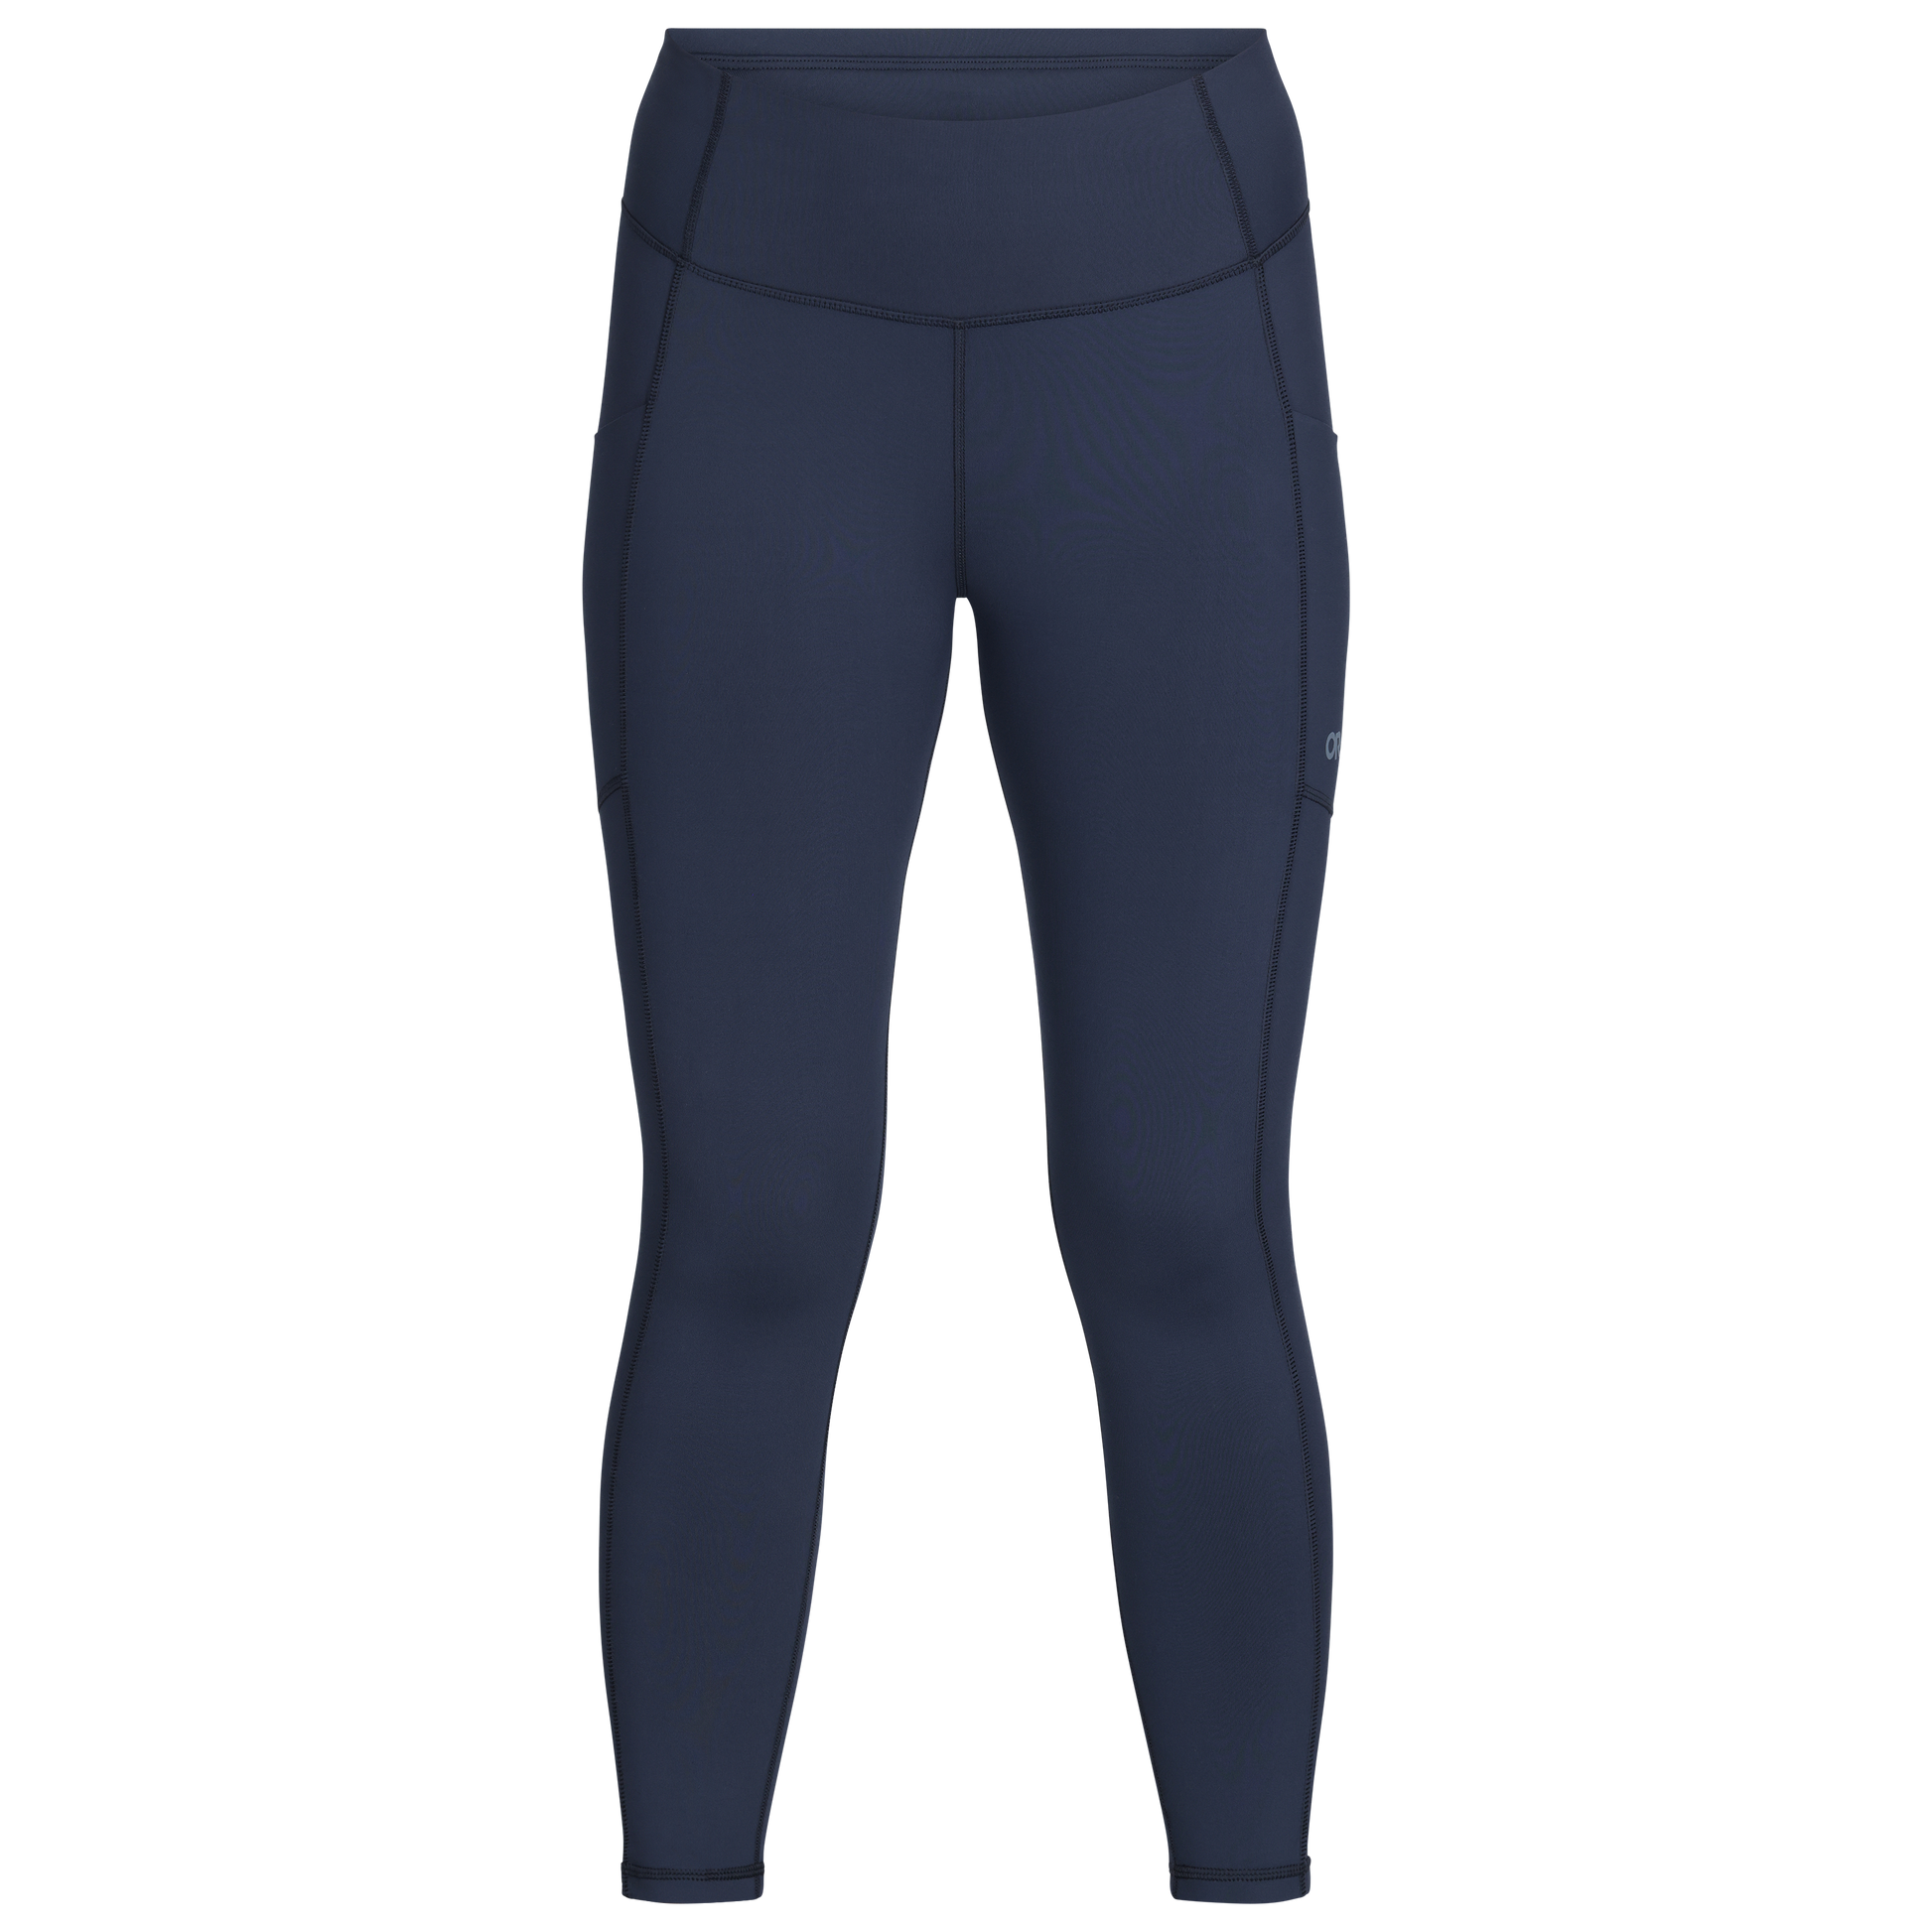 Mid-Rise Hiking Leggings – Musesonly